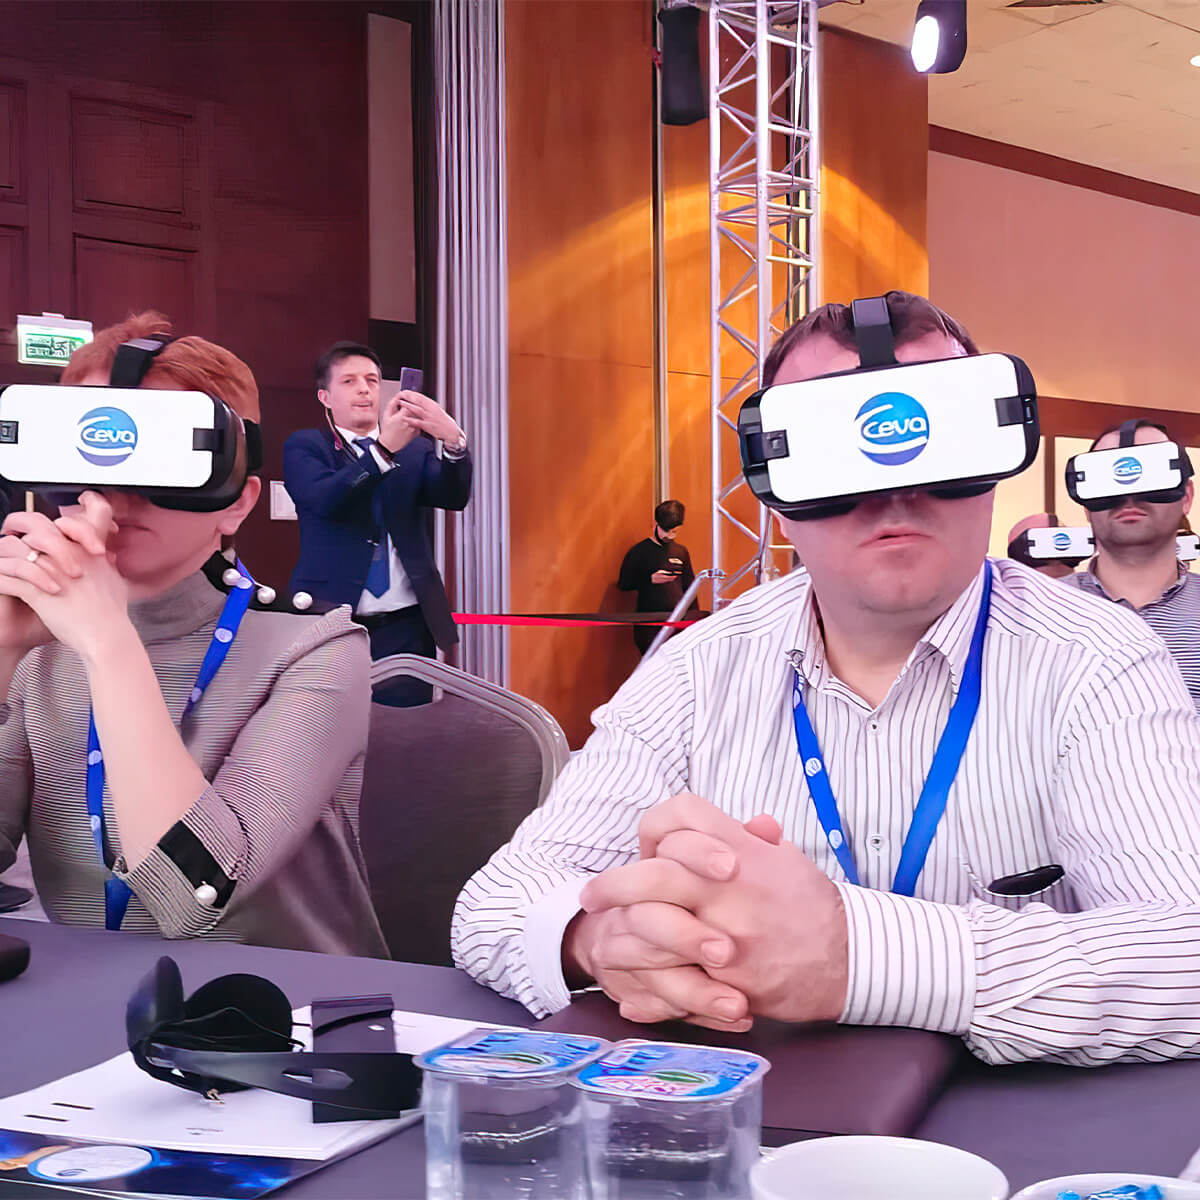 CEVA FUTURE 360° VR Conference Experience at Istanbul Hilton